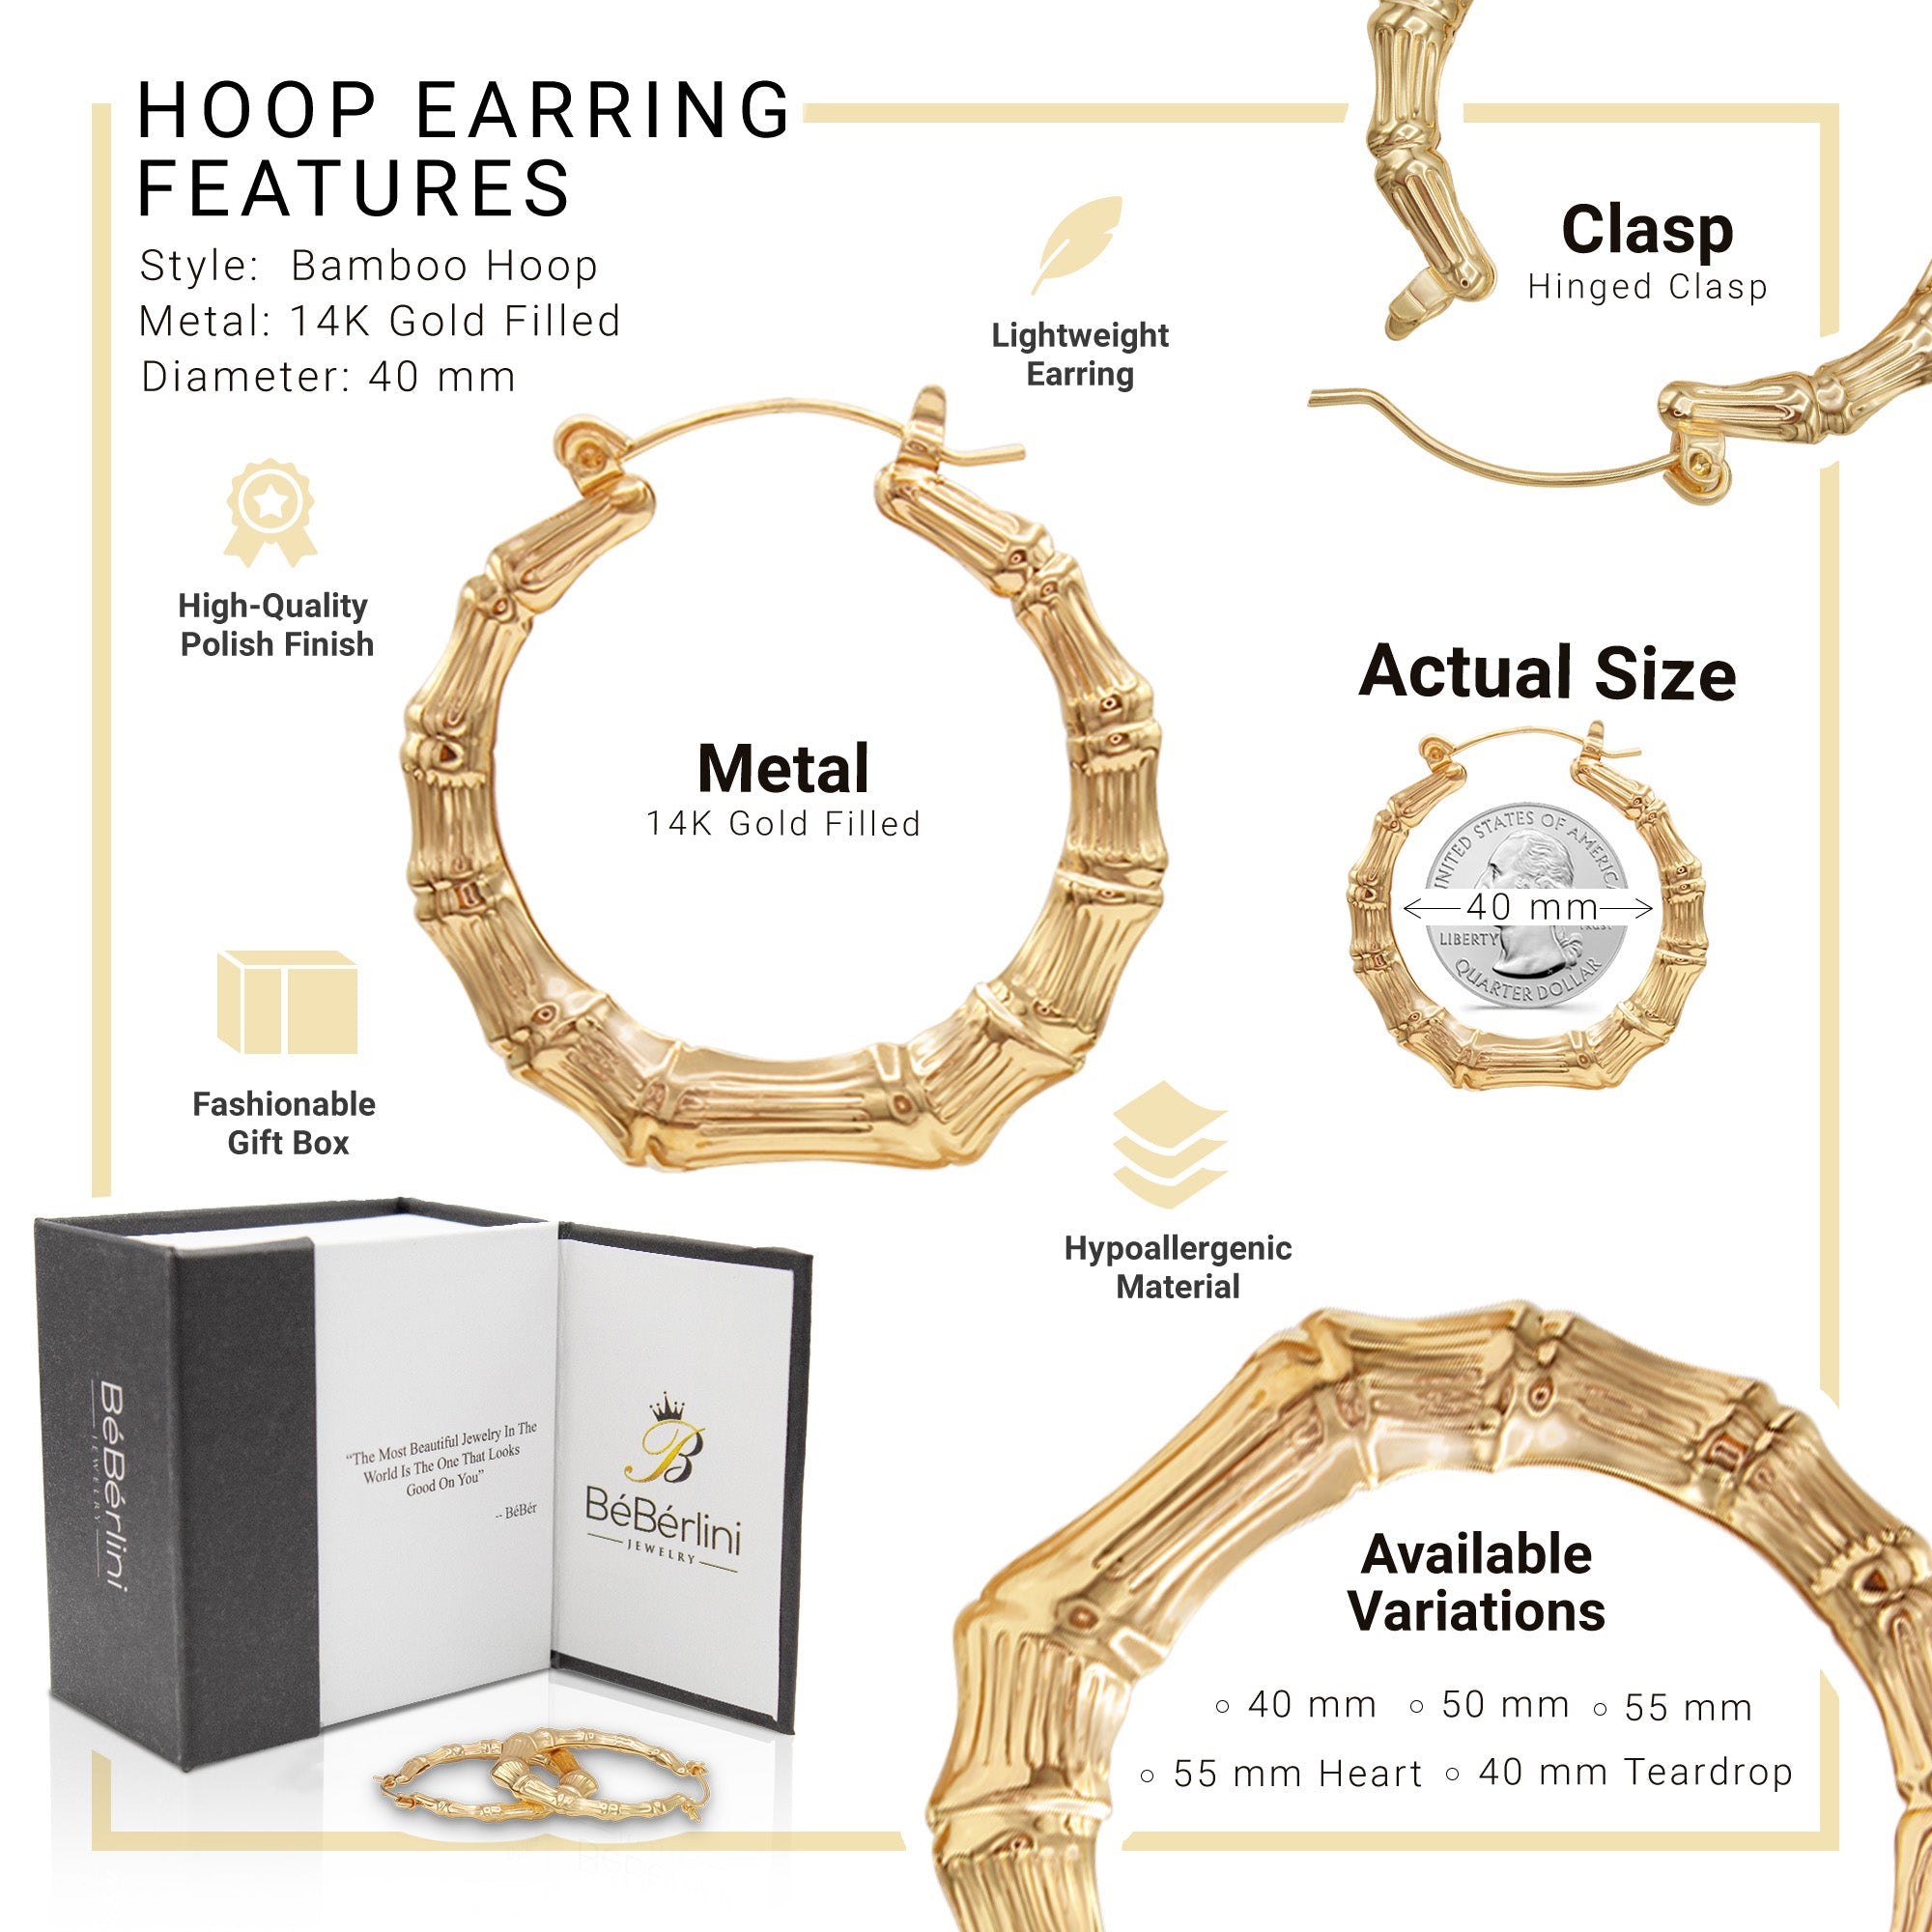 Bamboo Hoops Features